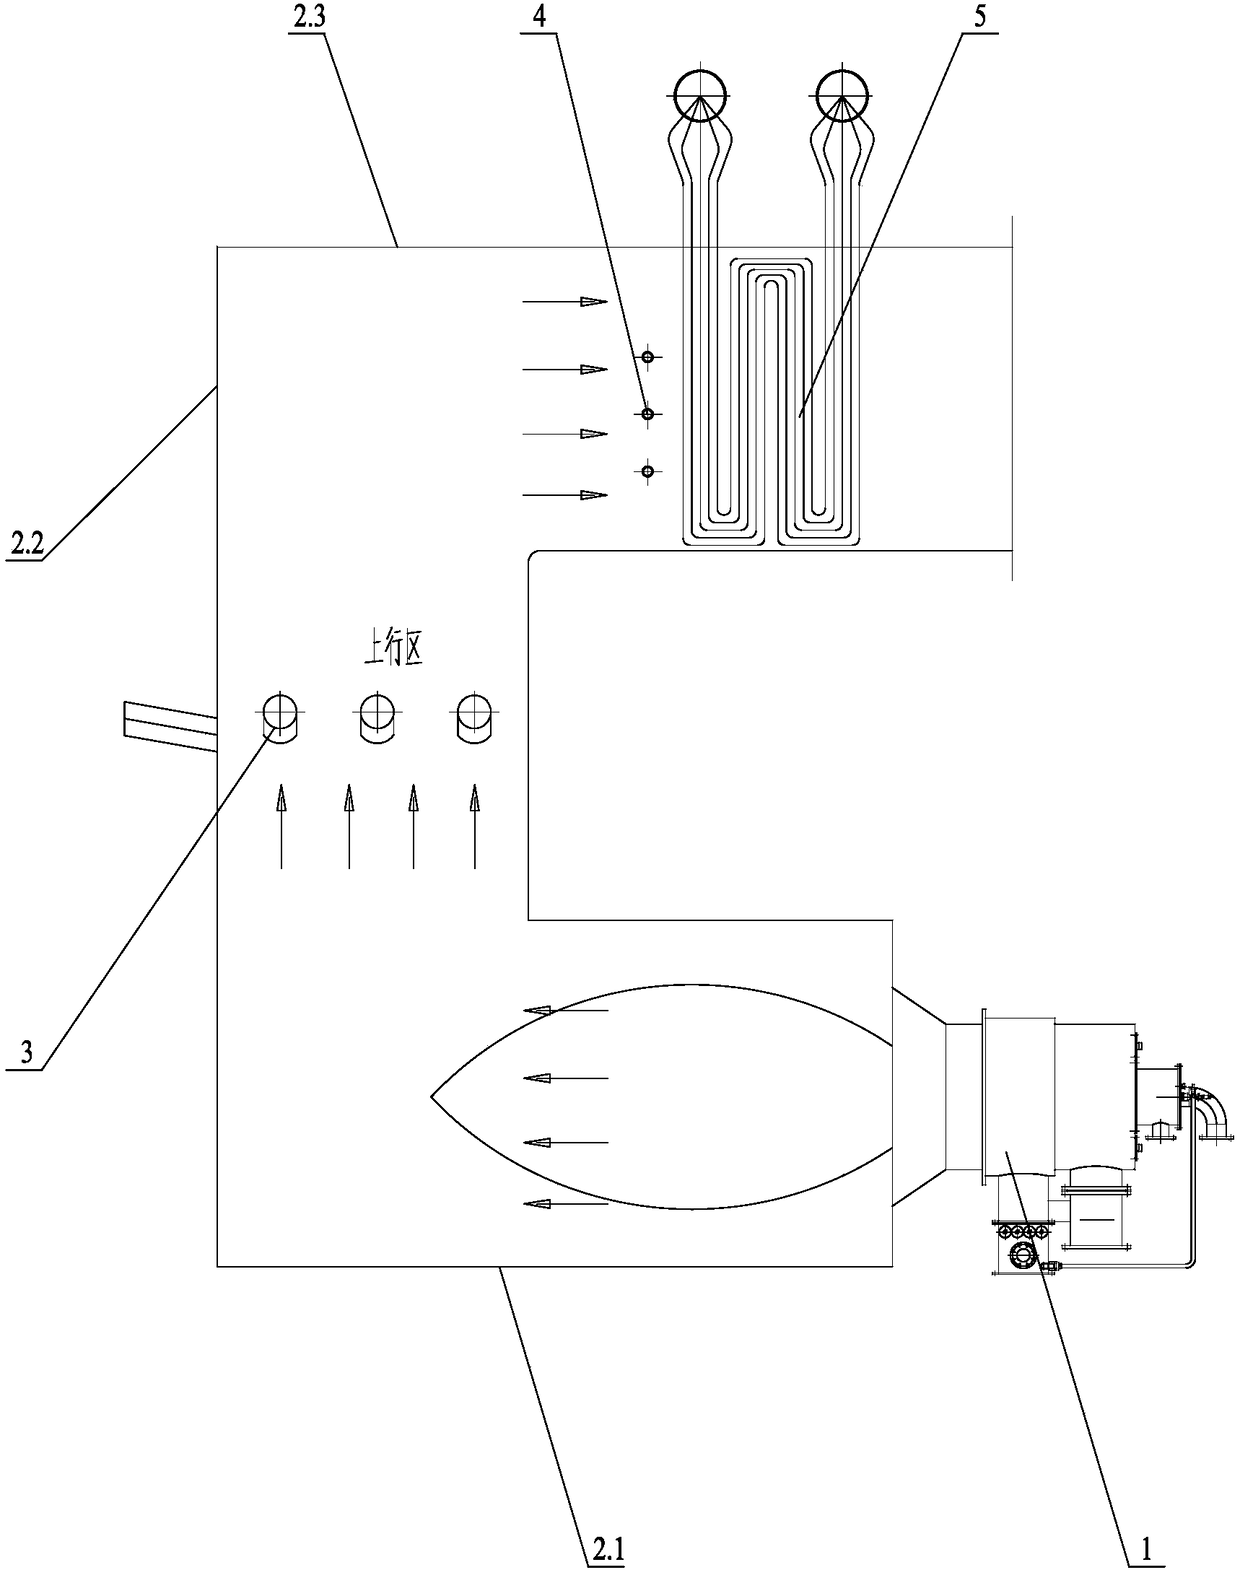 The burner structure of the rear-mounted steam heating furnace